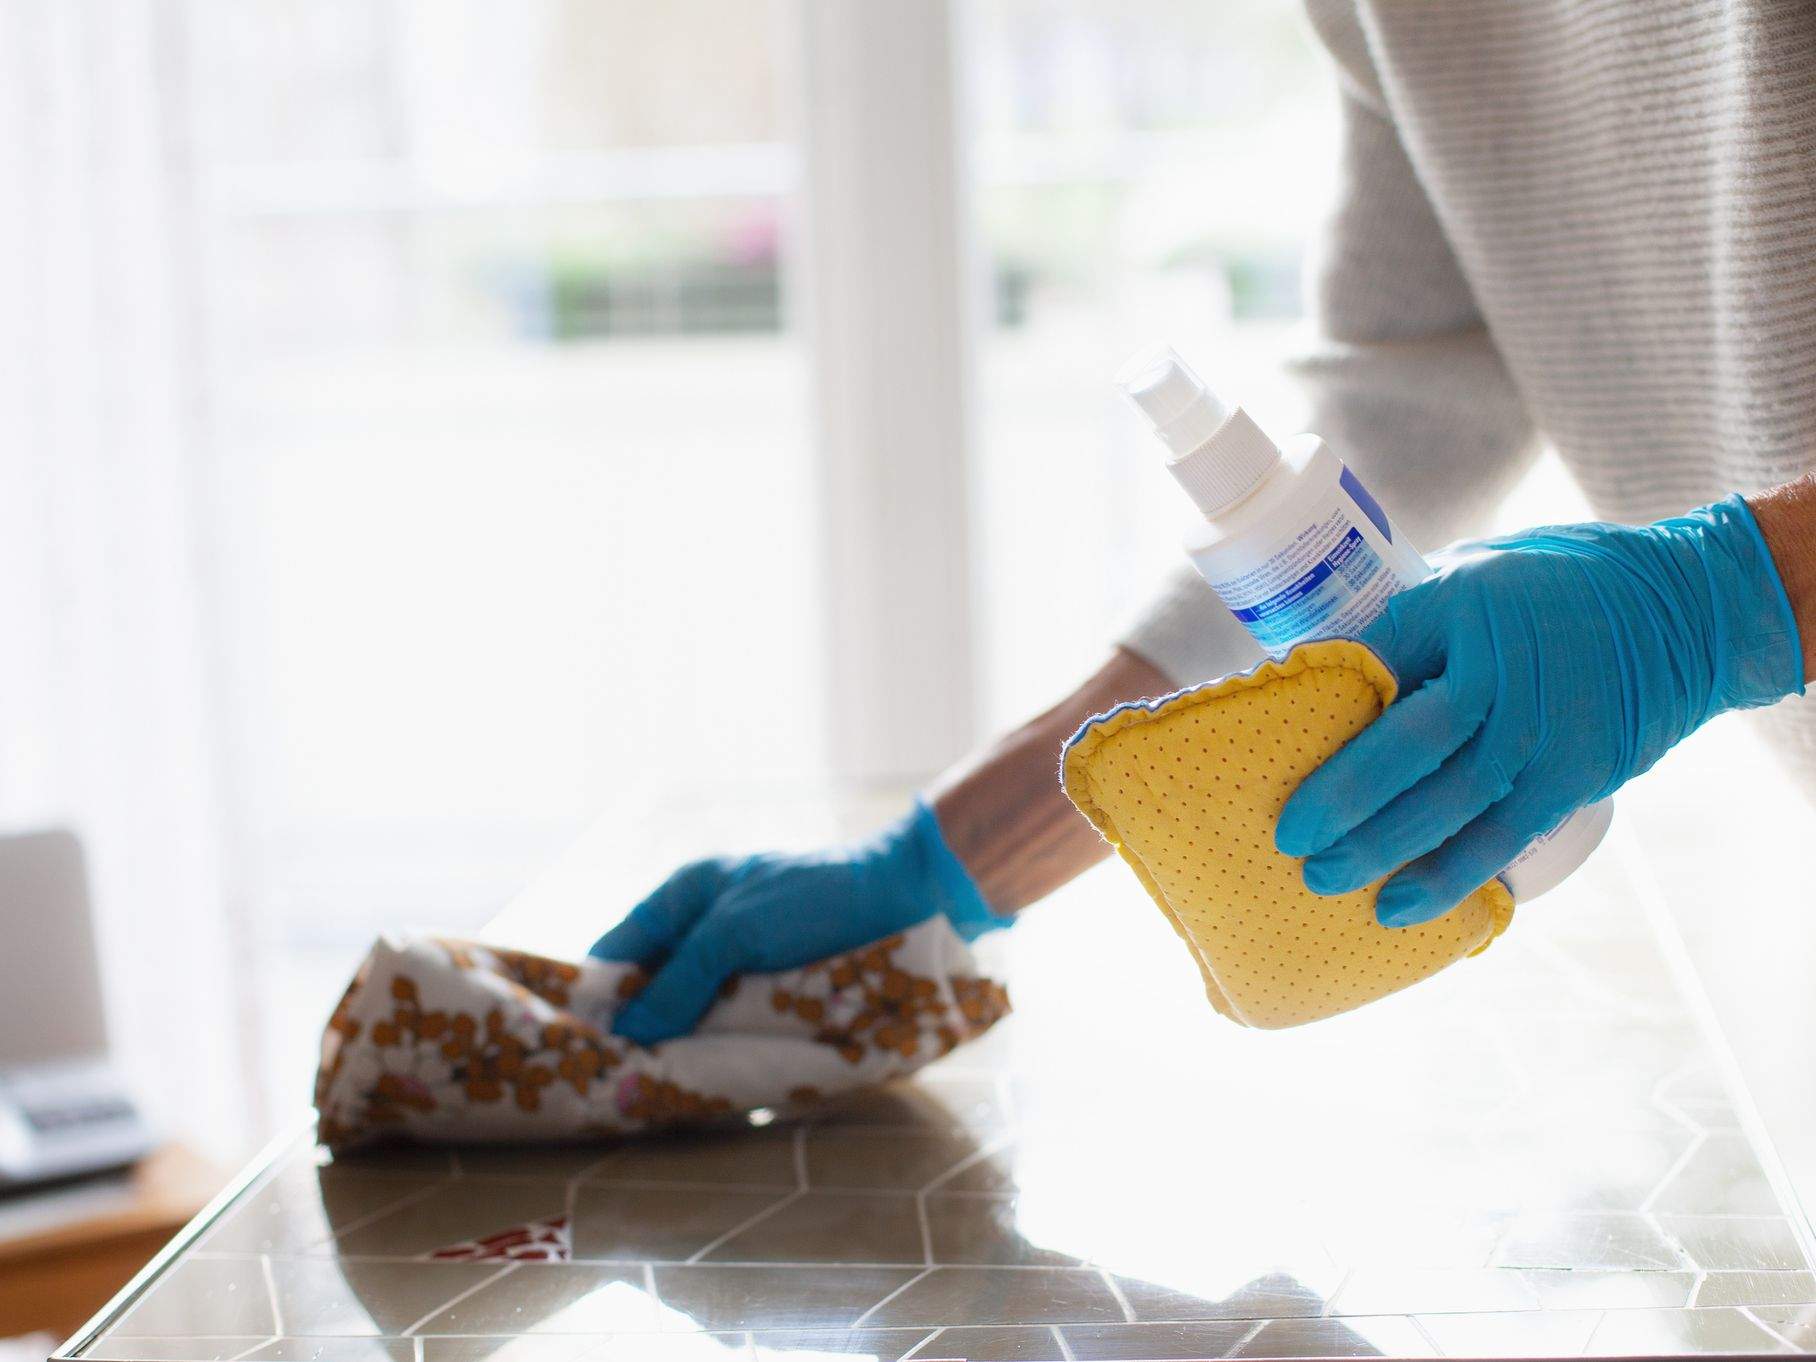 The Best Cleaning Services LIDA Κερκύρας 16, Αθήνα 113 62 : 21 0882 4156